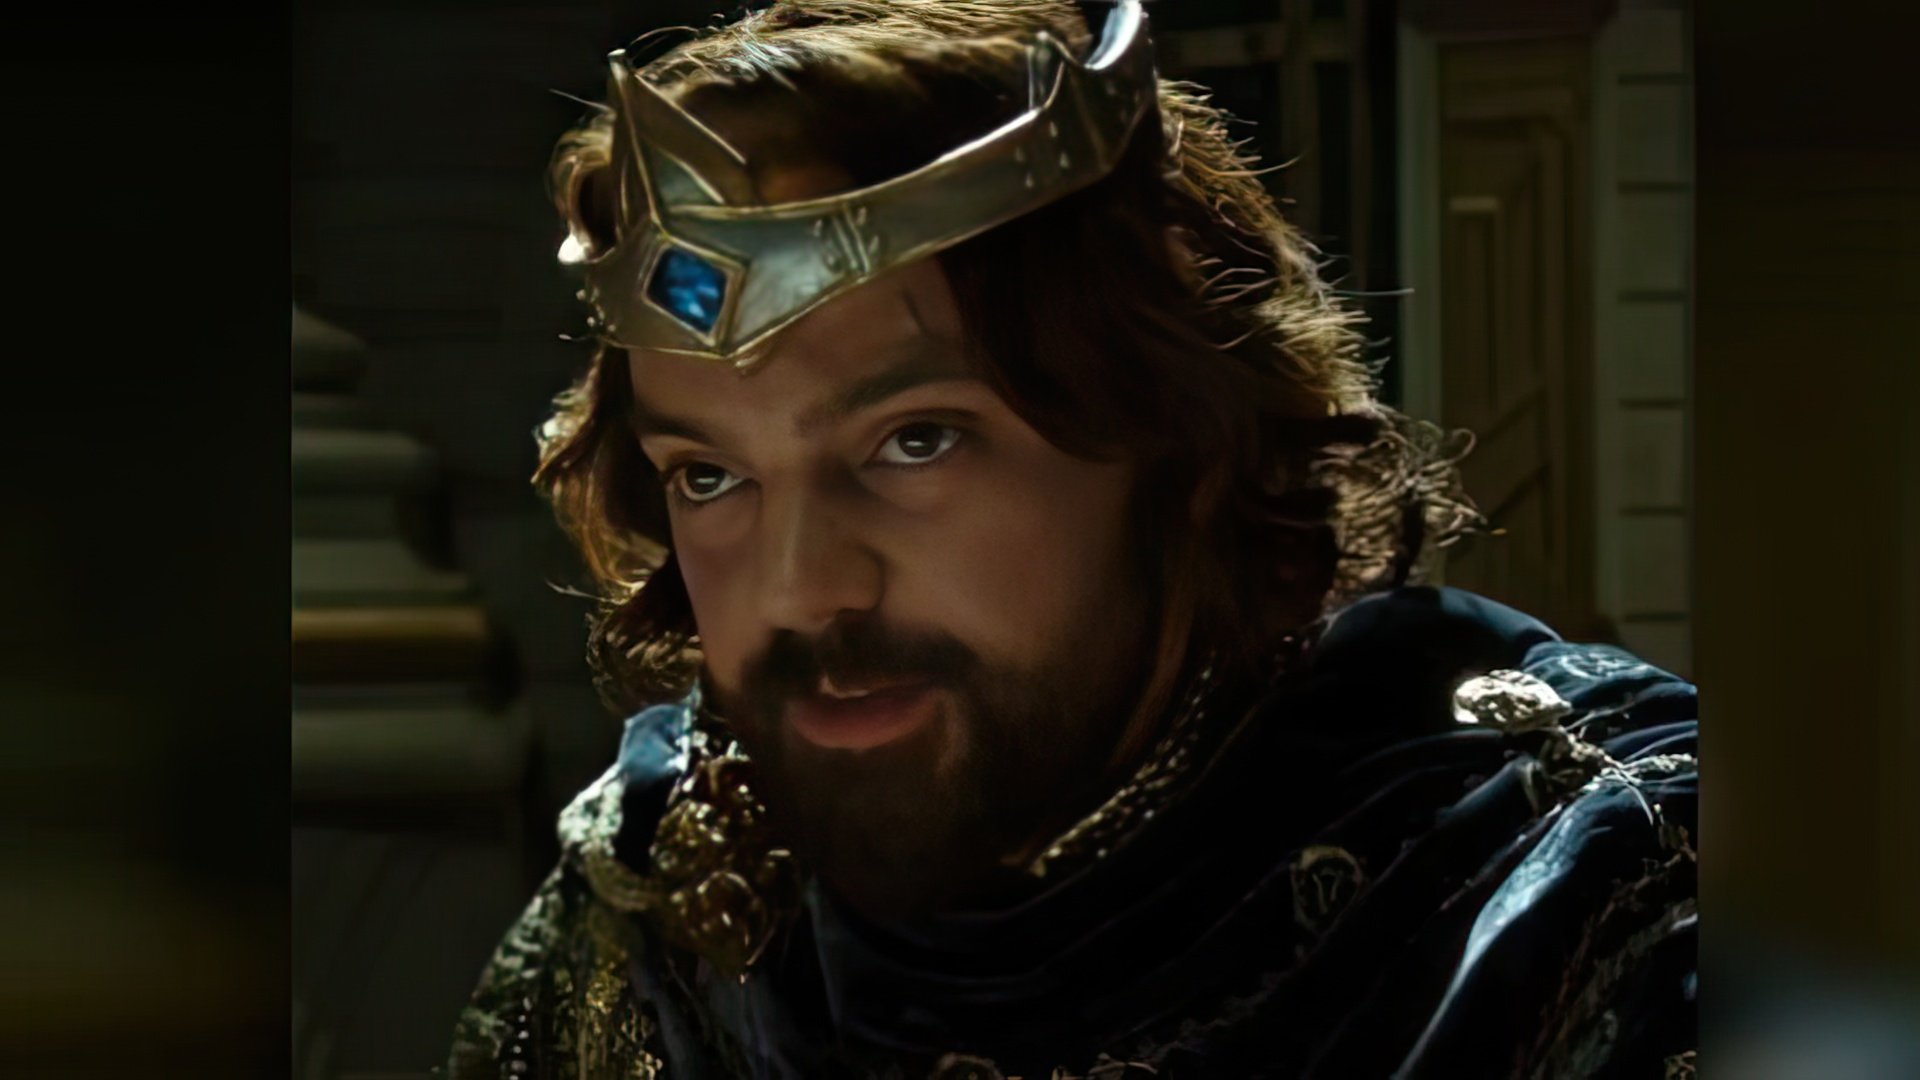 In 'Warcraft', Dominic Cooper played the King of Men